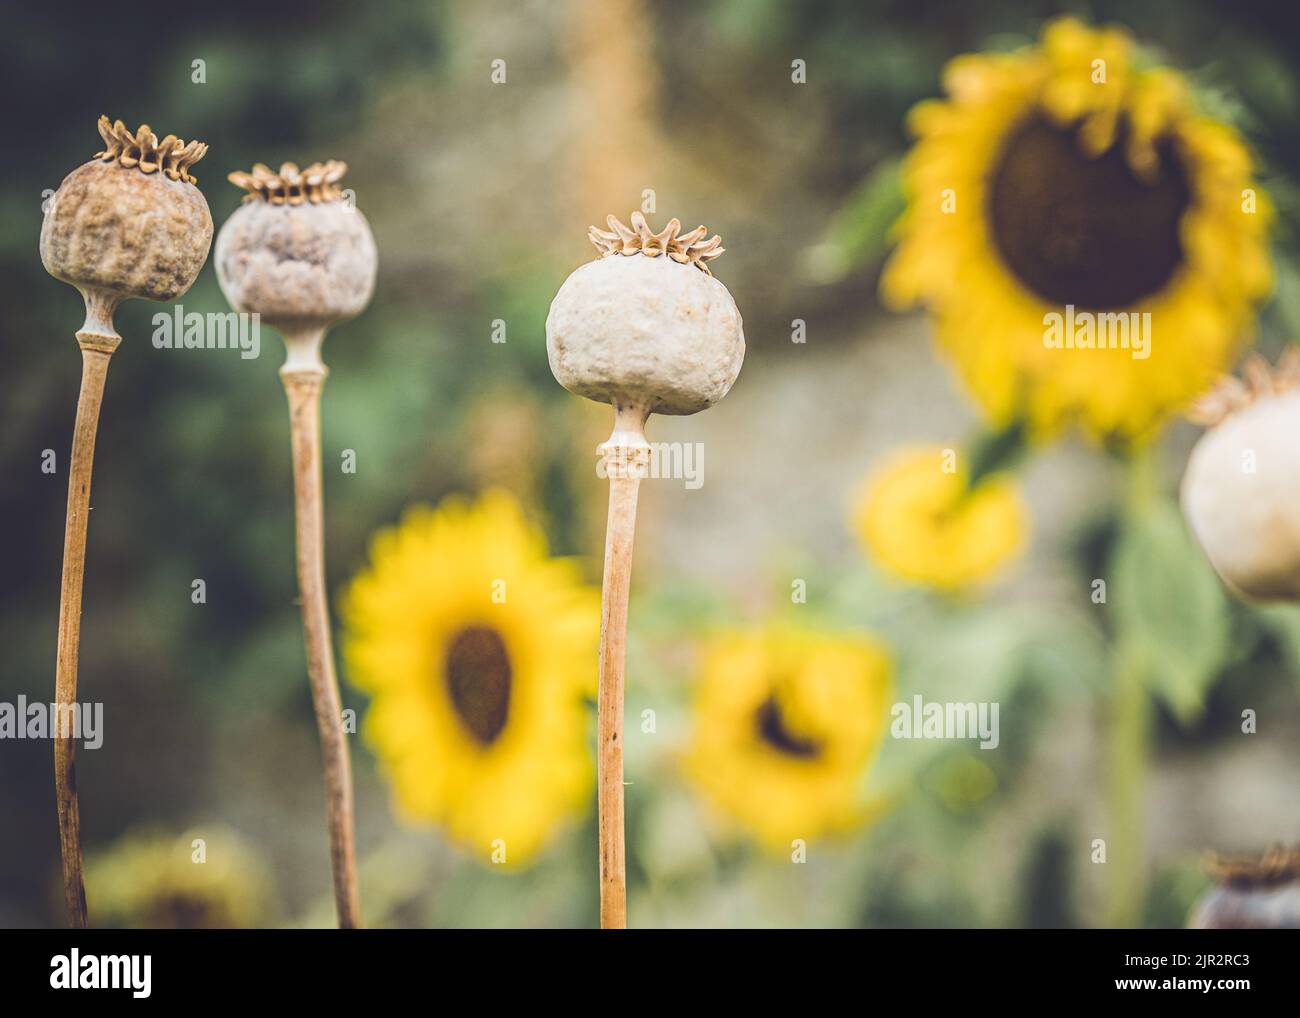 Sunflowers and seed poppy heads in the walled formal gardens at Rousham House, Oxfordshire. Stock Photo